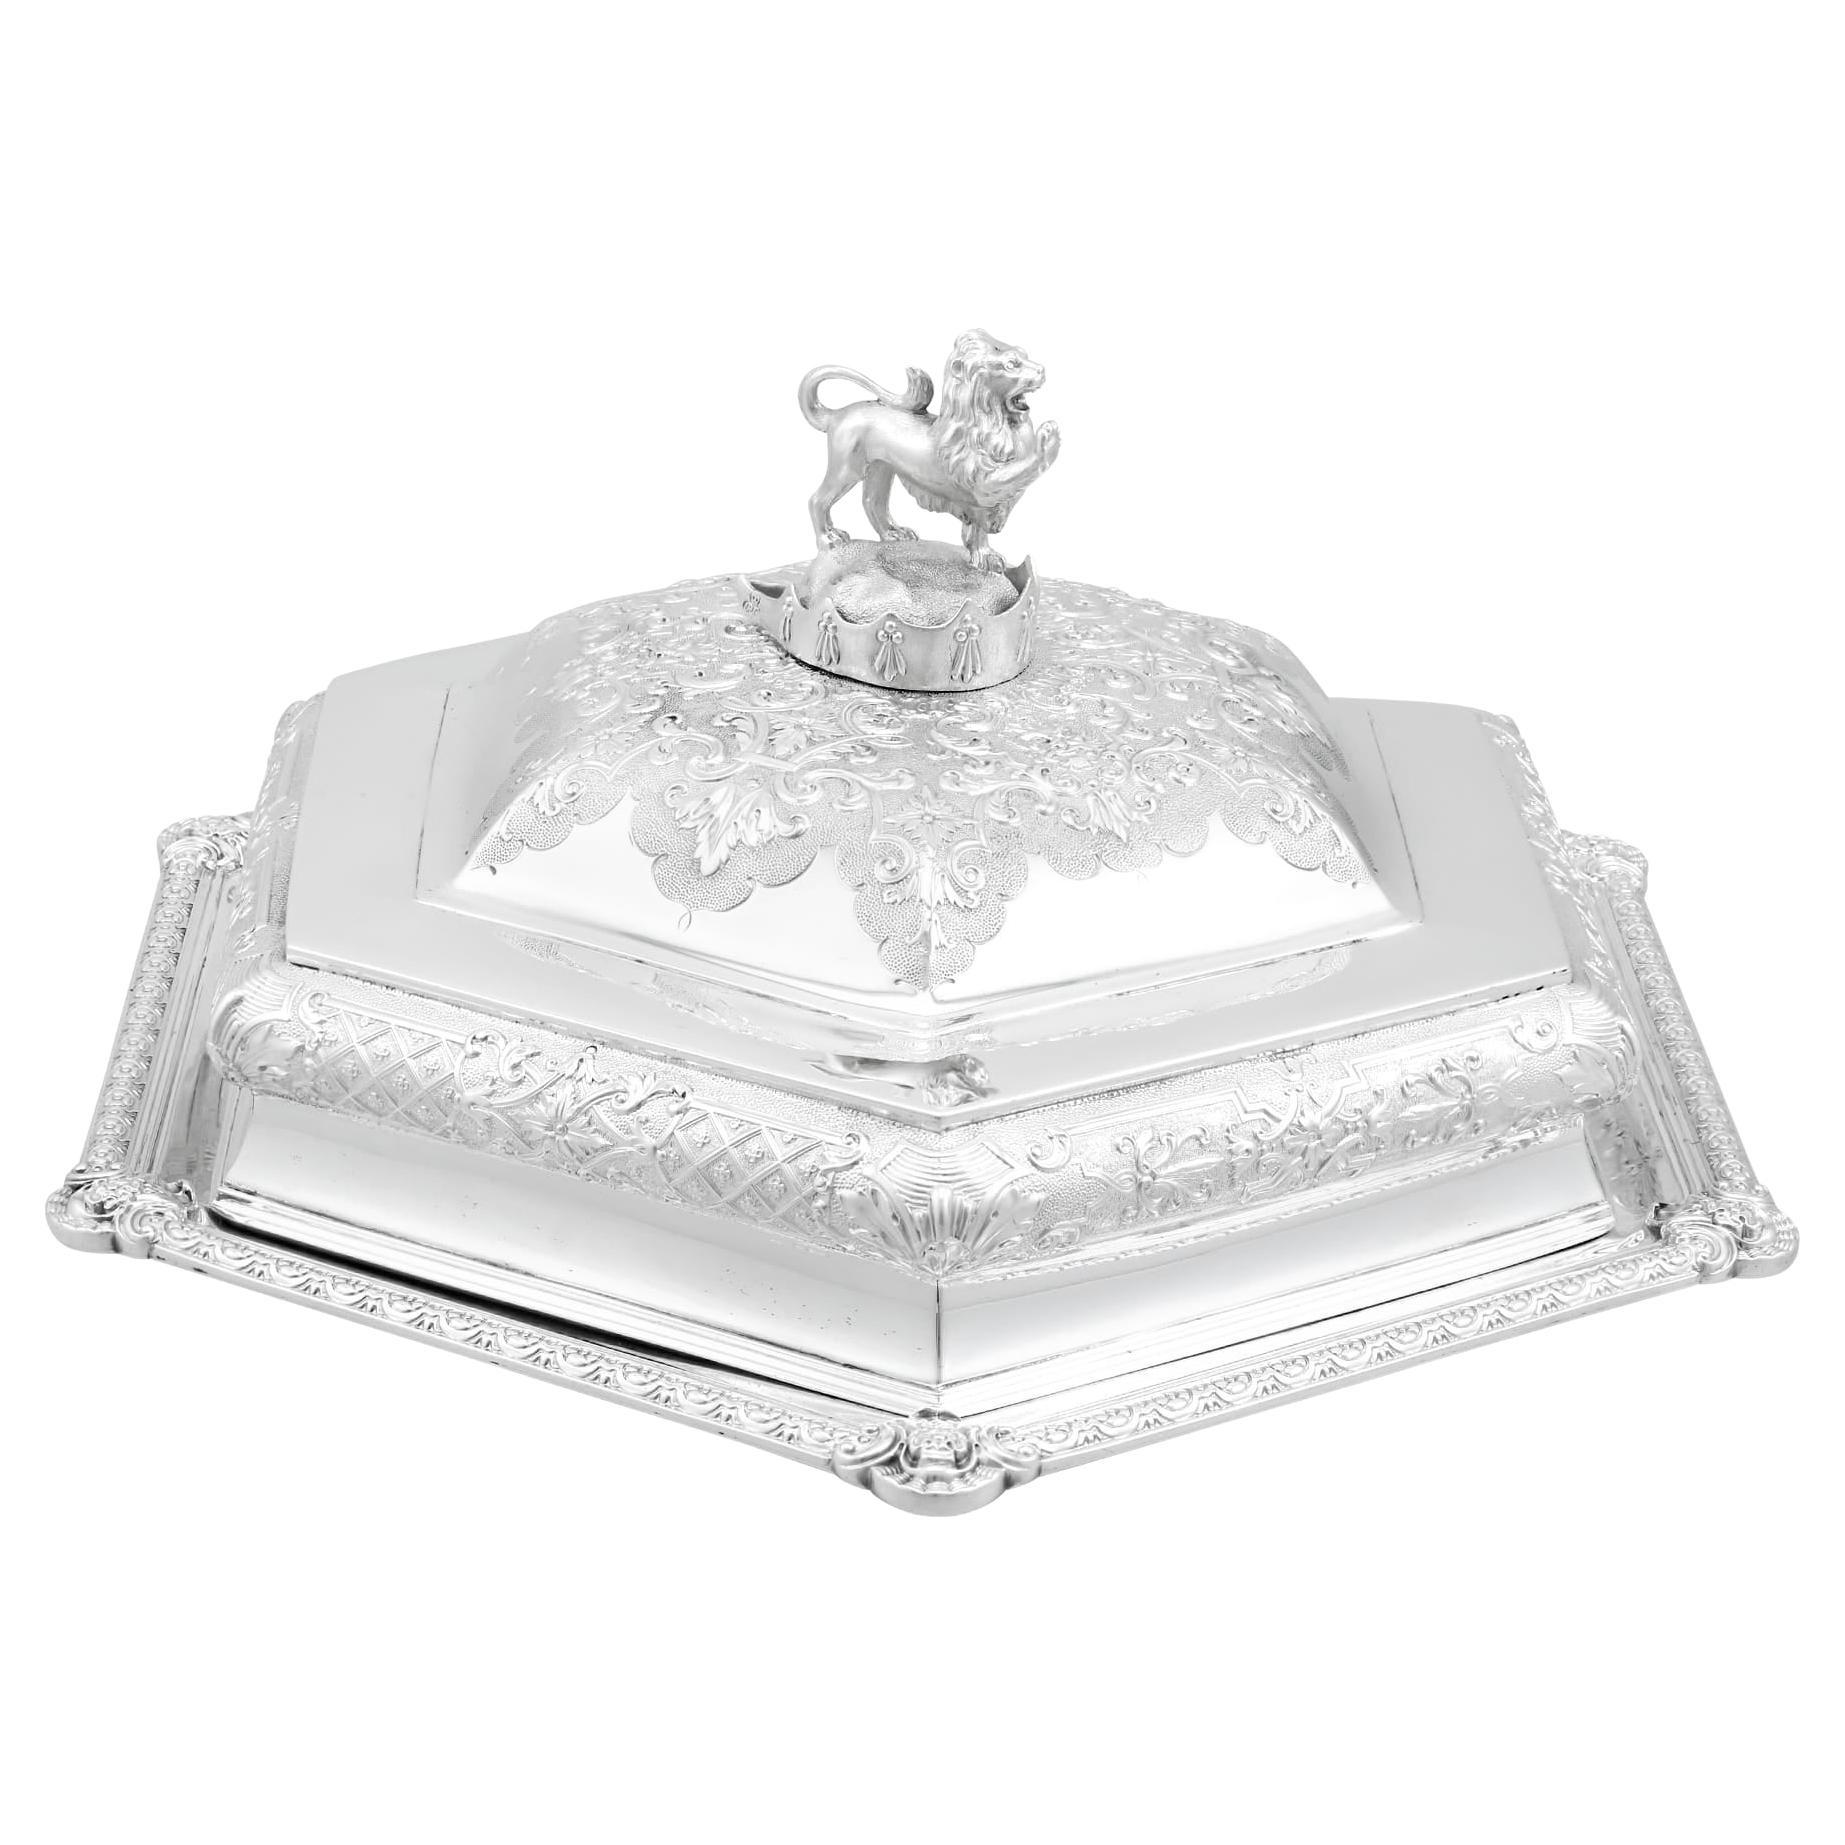 Antique Sterling Silver Covered Serving Dish by Robert Garrard II